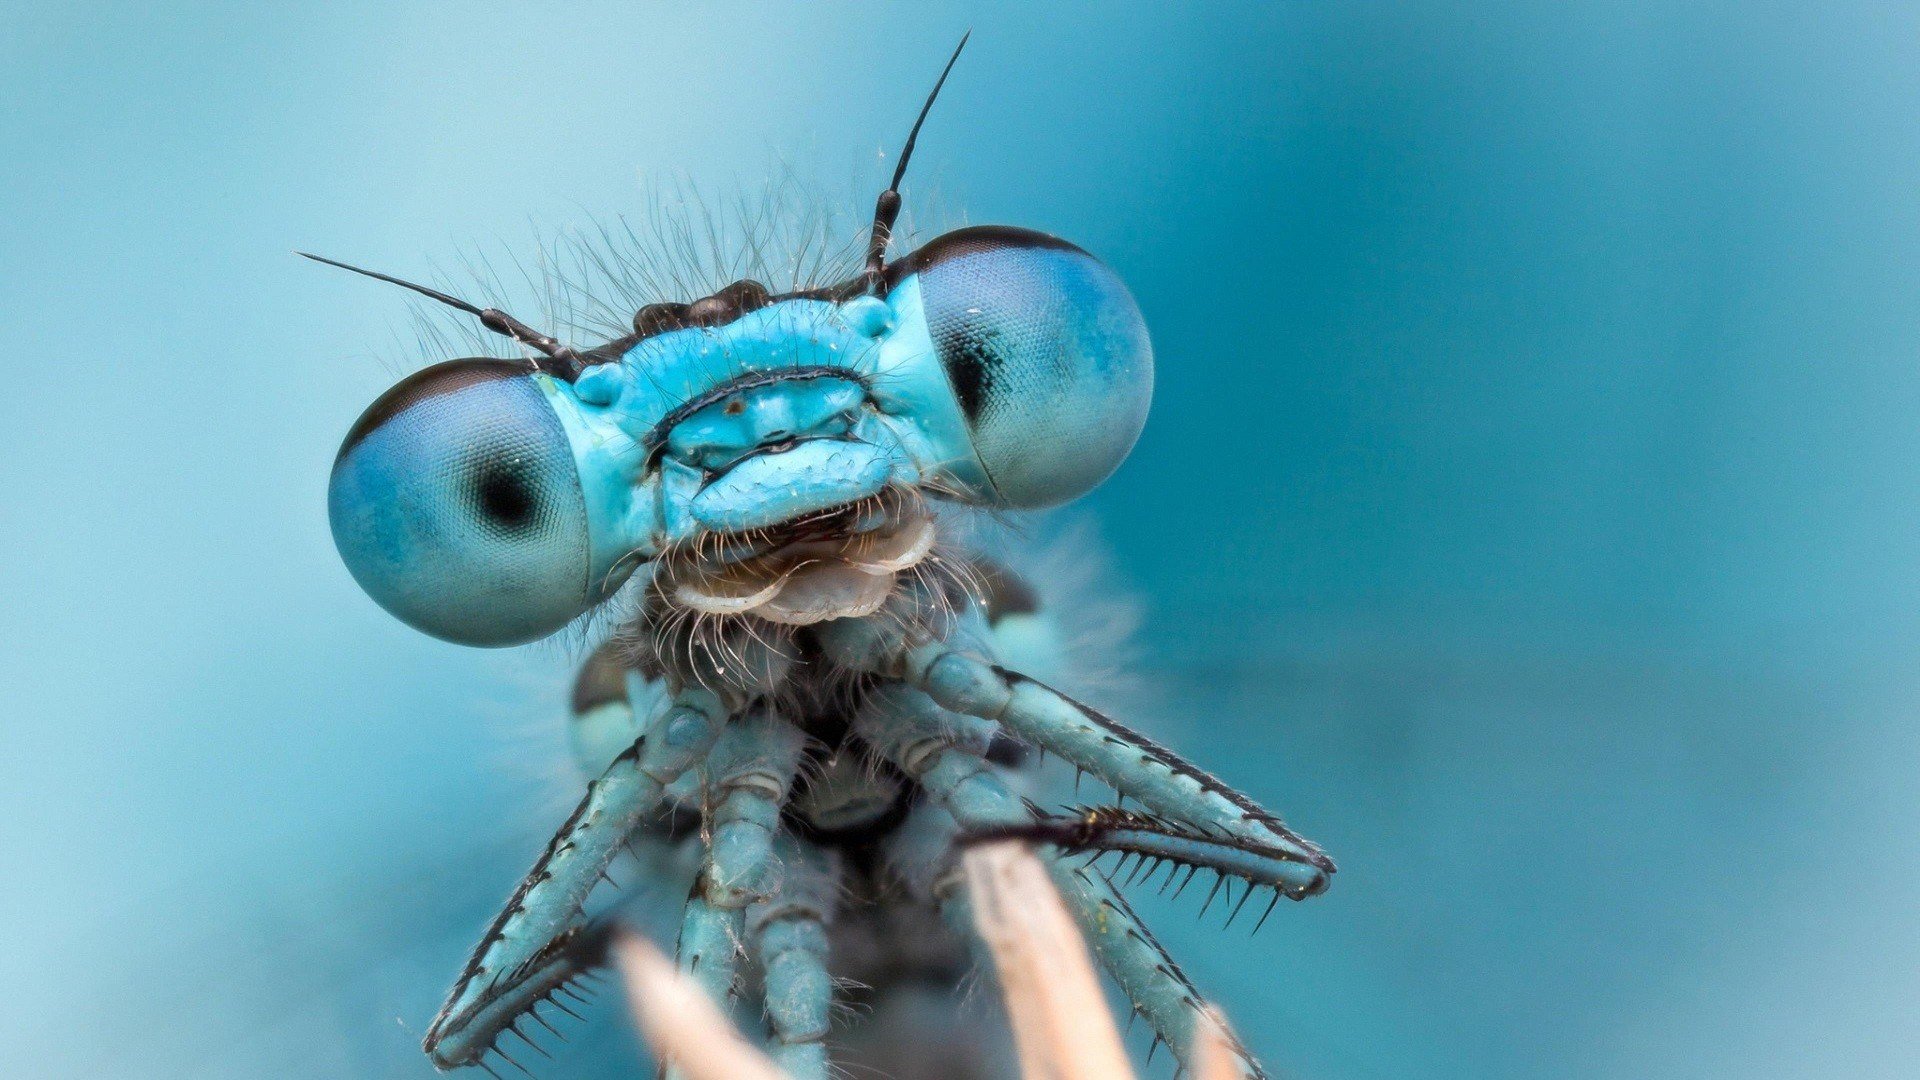 dragonflies, Bug, Insect, Nature, Macro, Blue Wallpaper